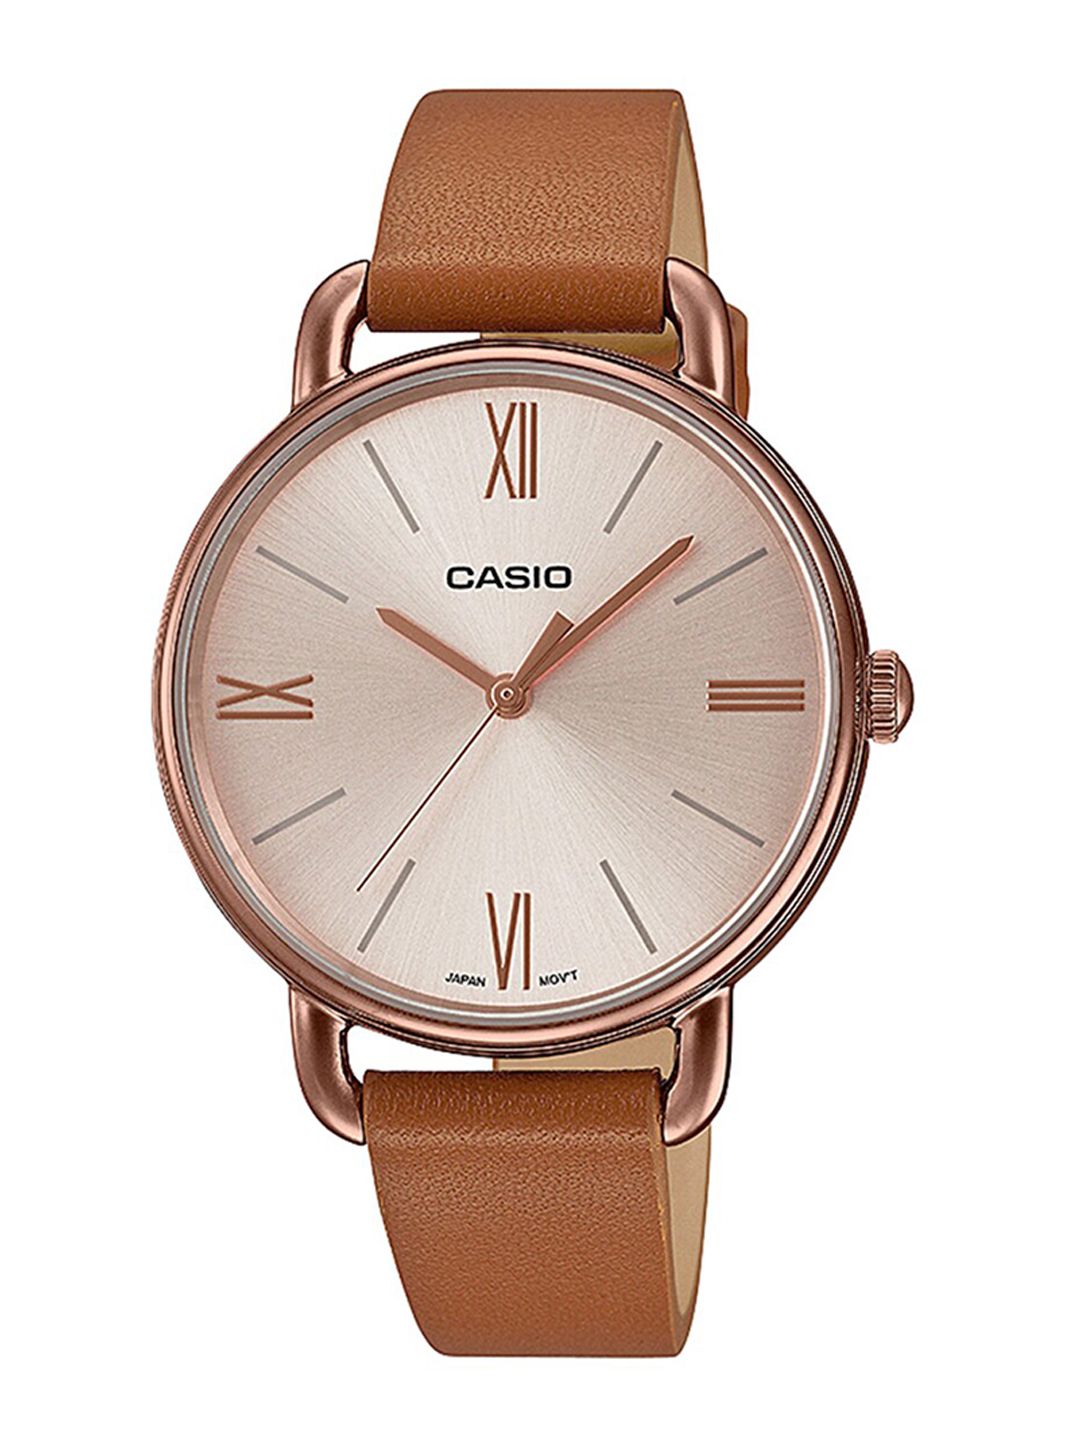 CASIO Enticer Ladies Rose Gold Analogue Leather Watch A1808 Price in India